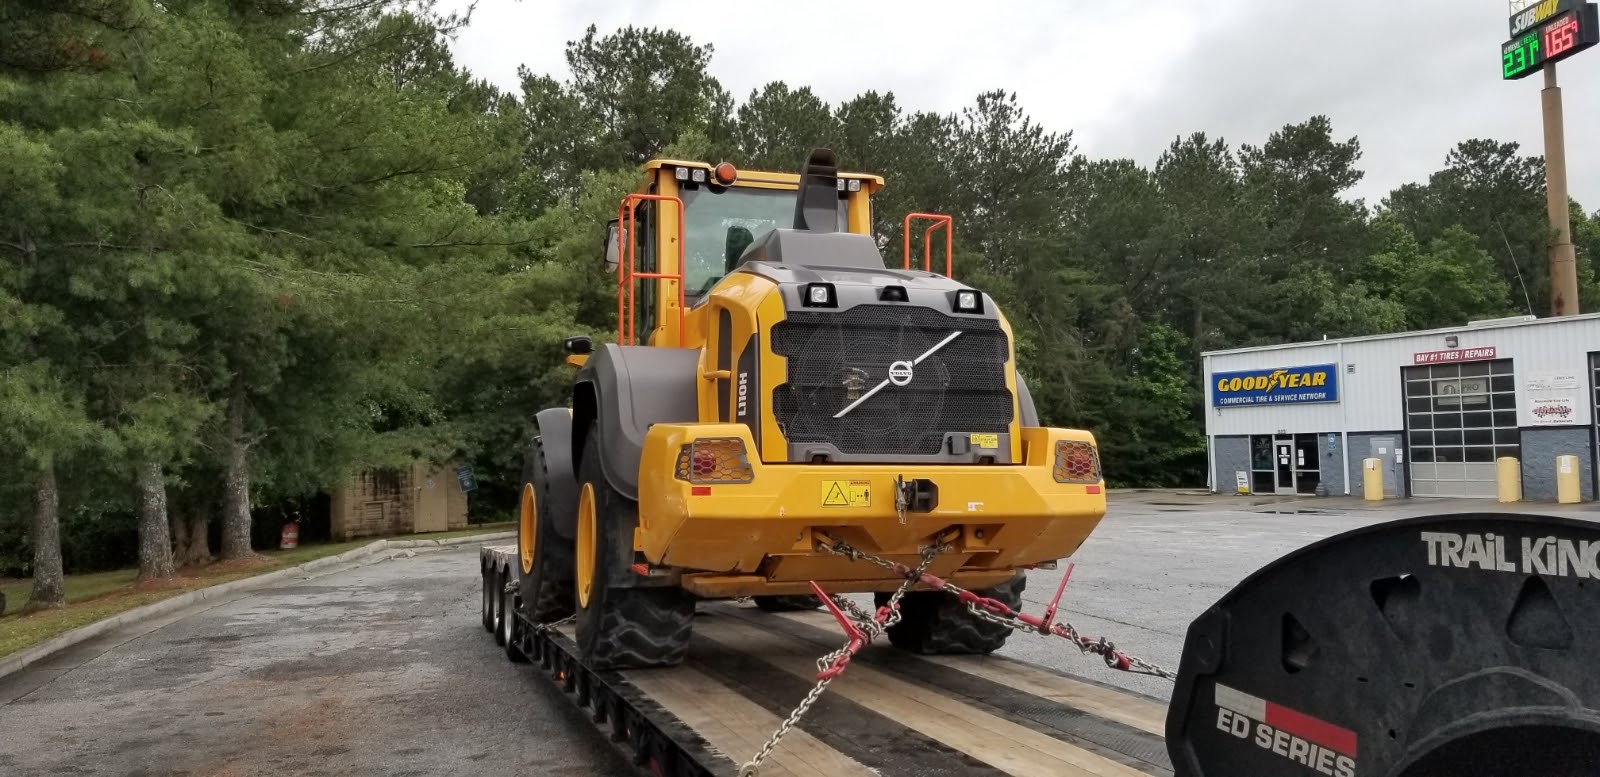 Shipping a Volvo 110 Loader on a lowboy trailer